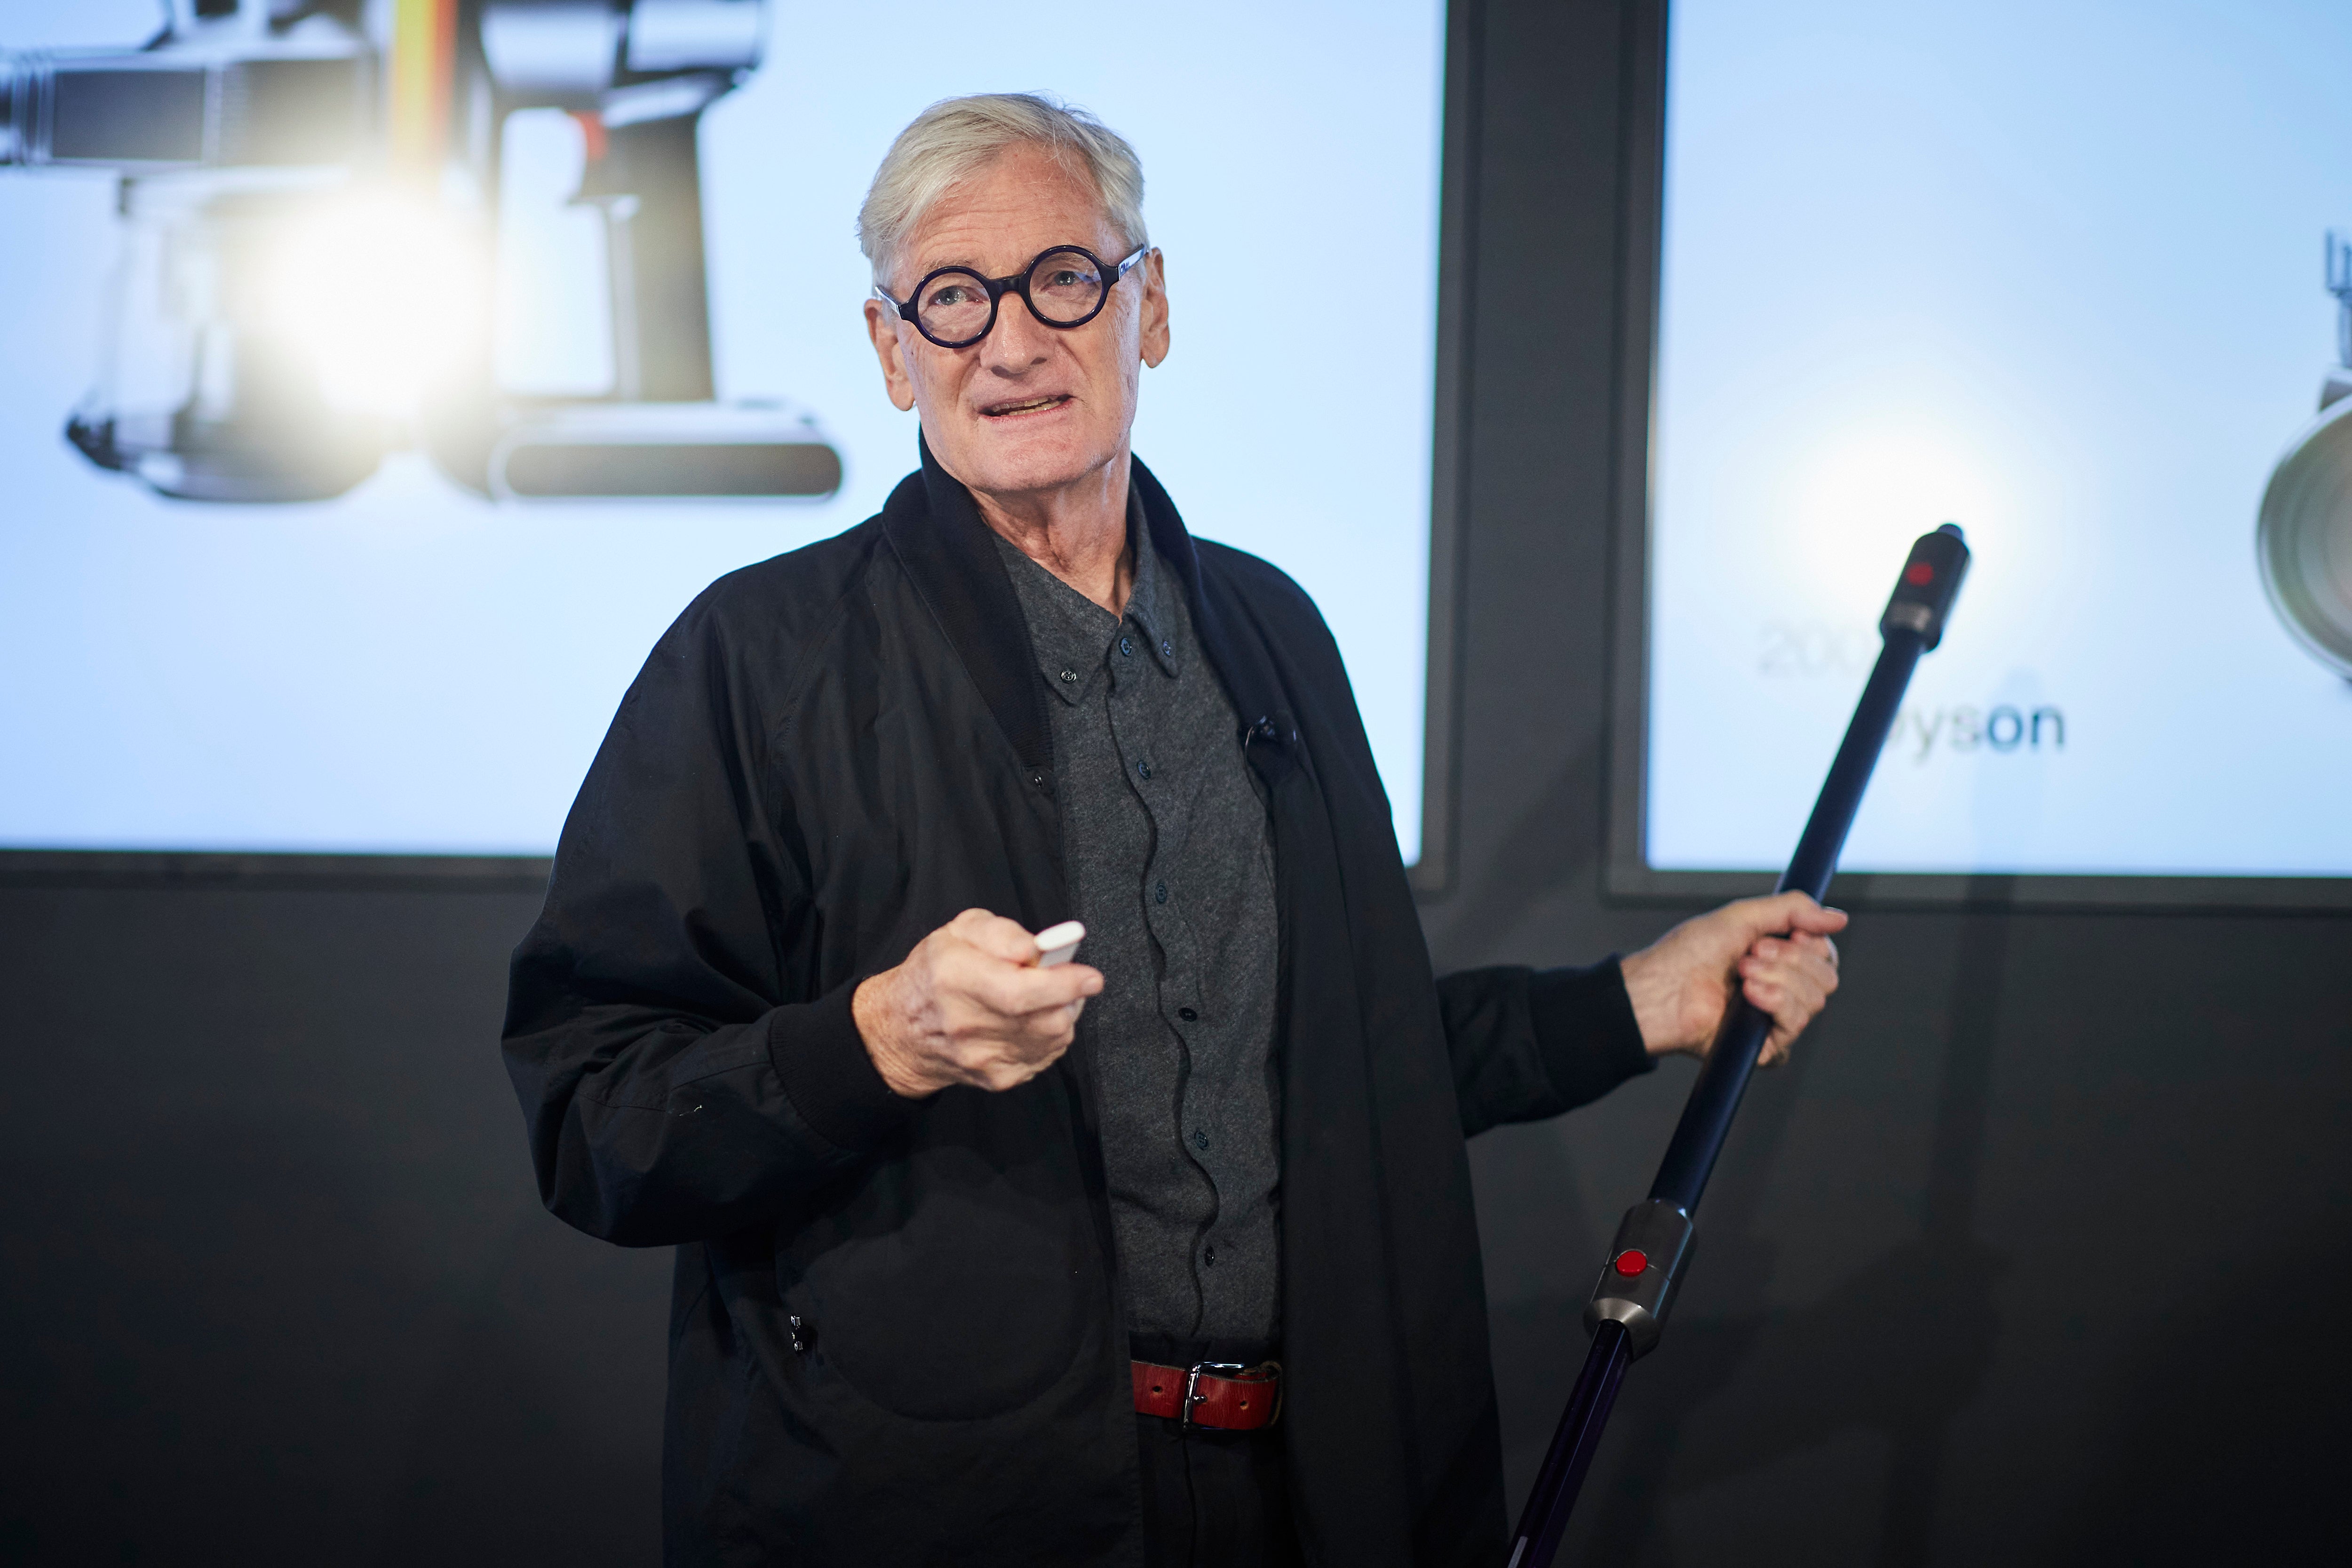 The company’s founder James Dyson was a prominent Brexiteer